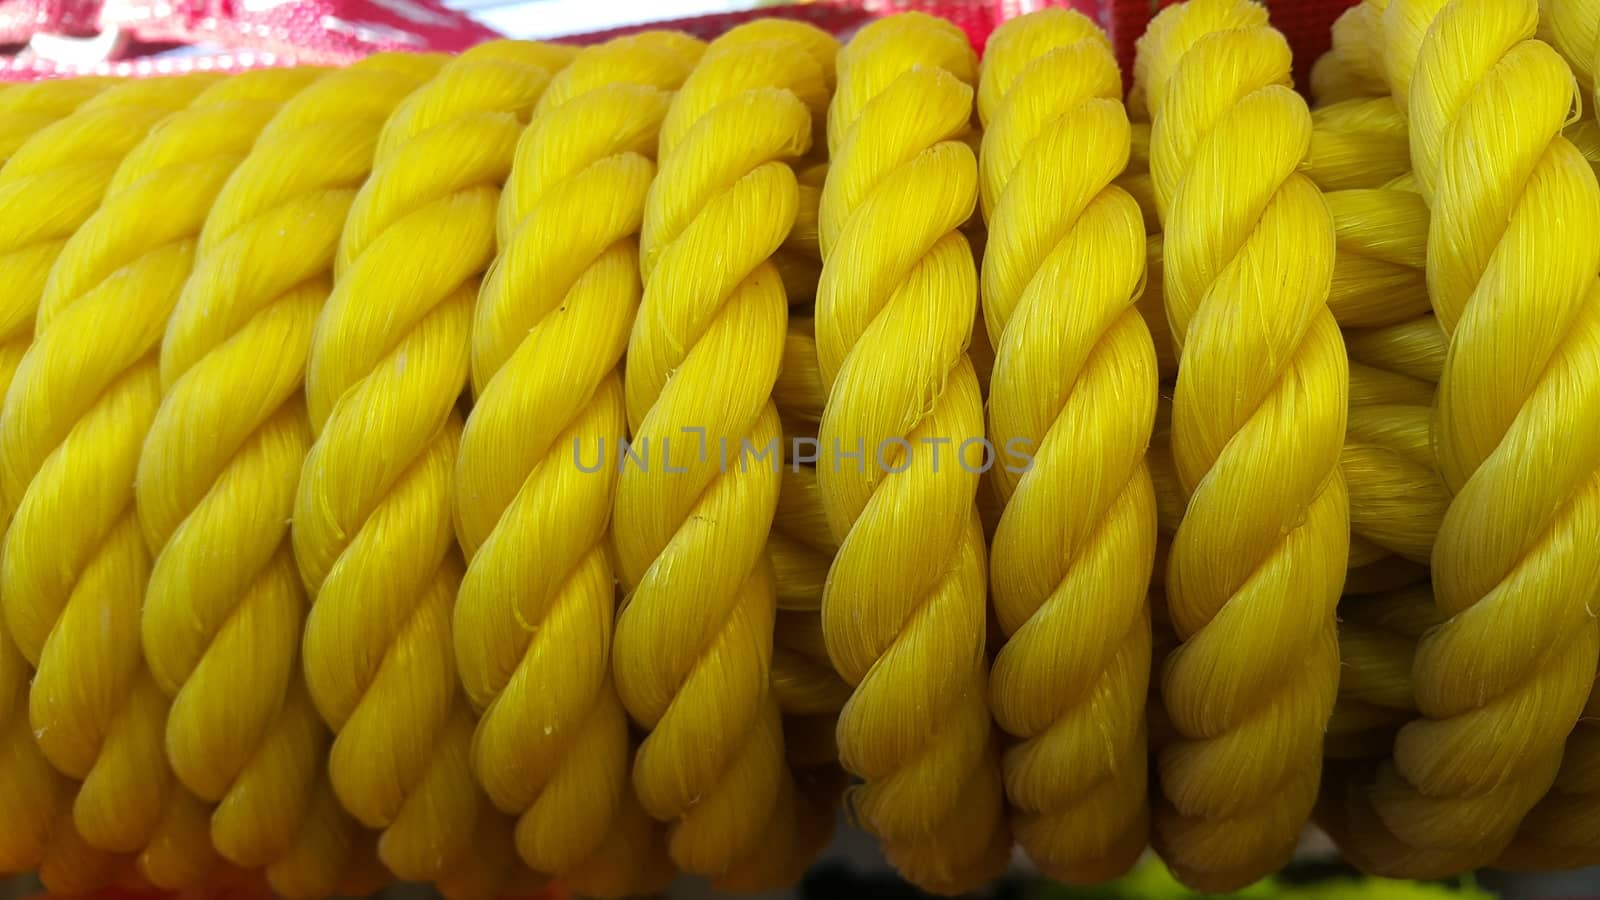 Hanks or coil of bright colored plastic rope interwoven by Photochowk